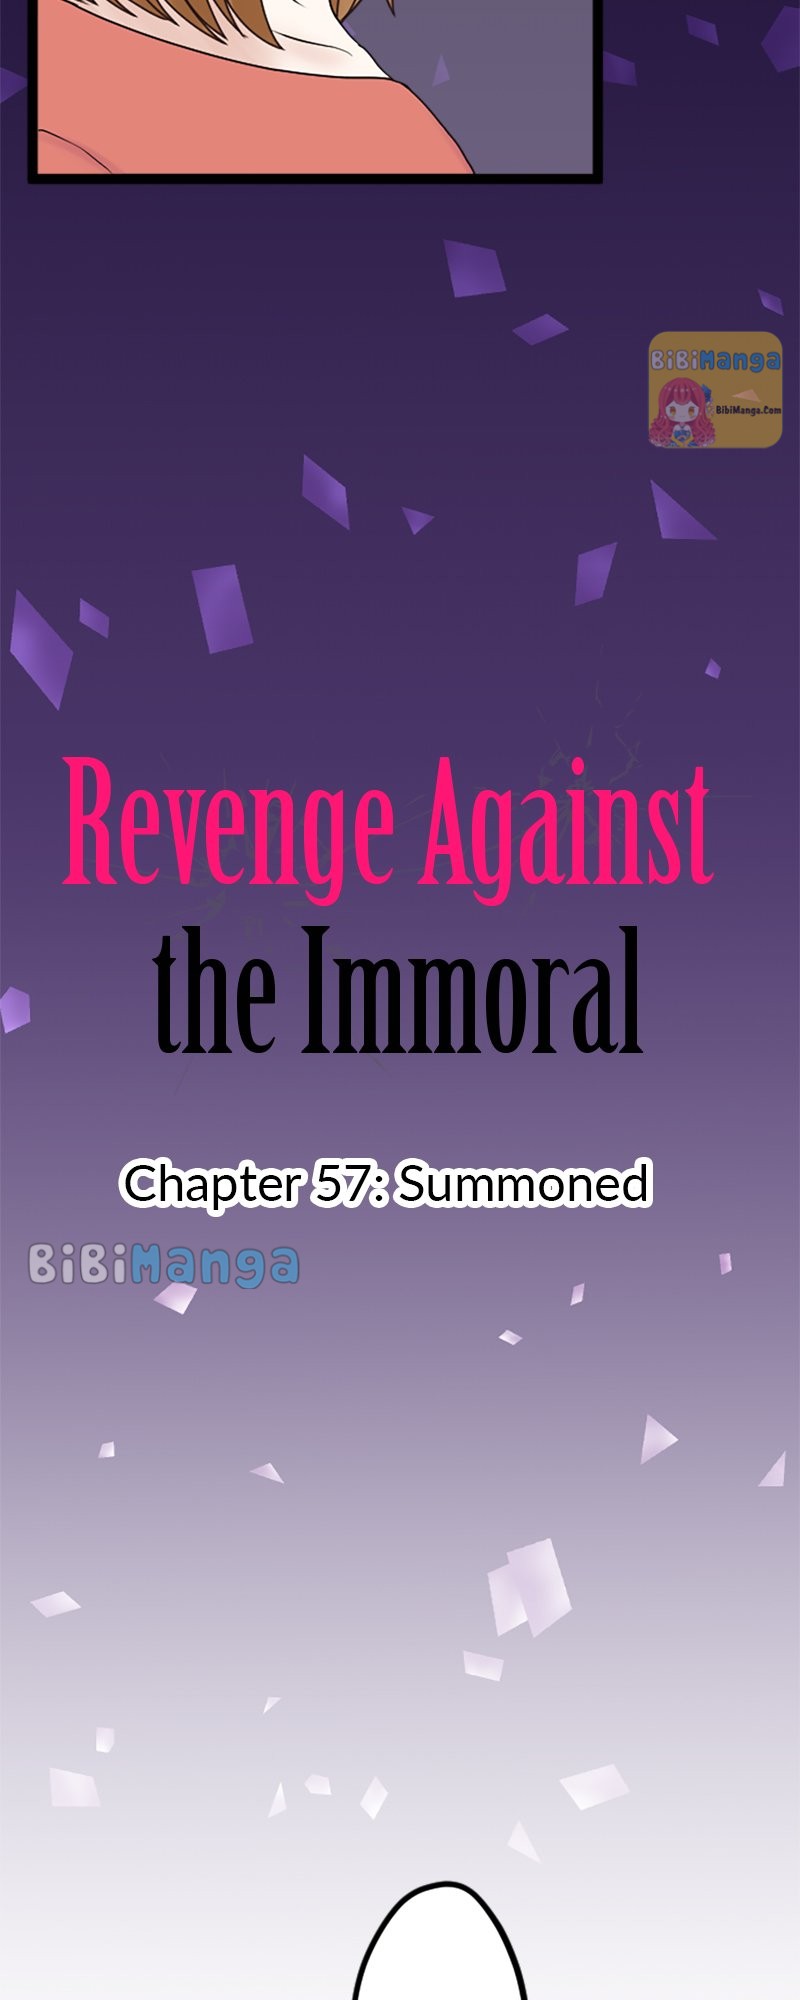 Revenge Against The Immoral - Page 2